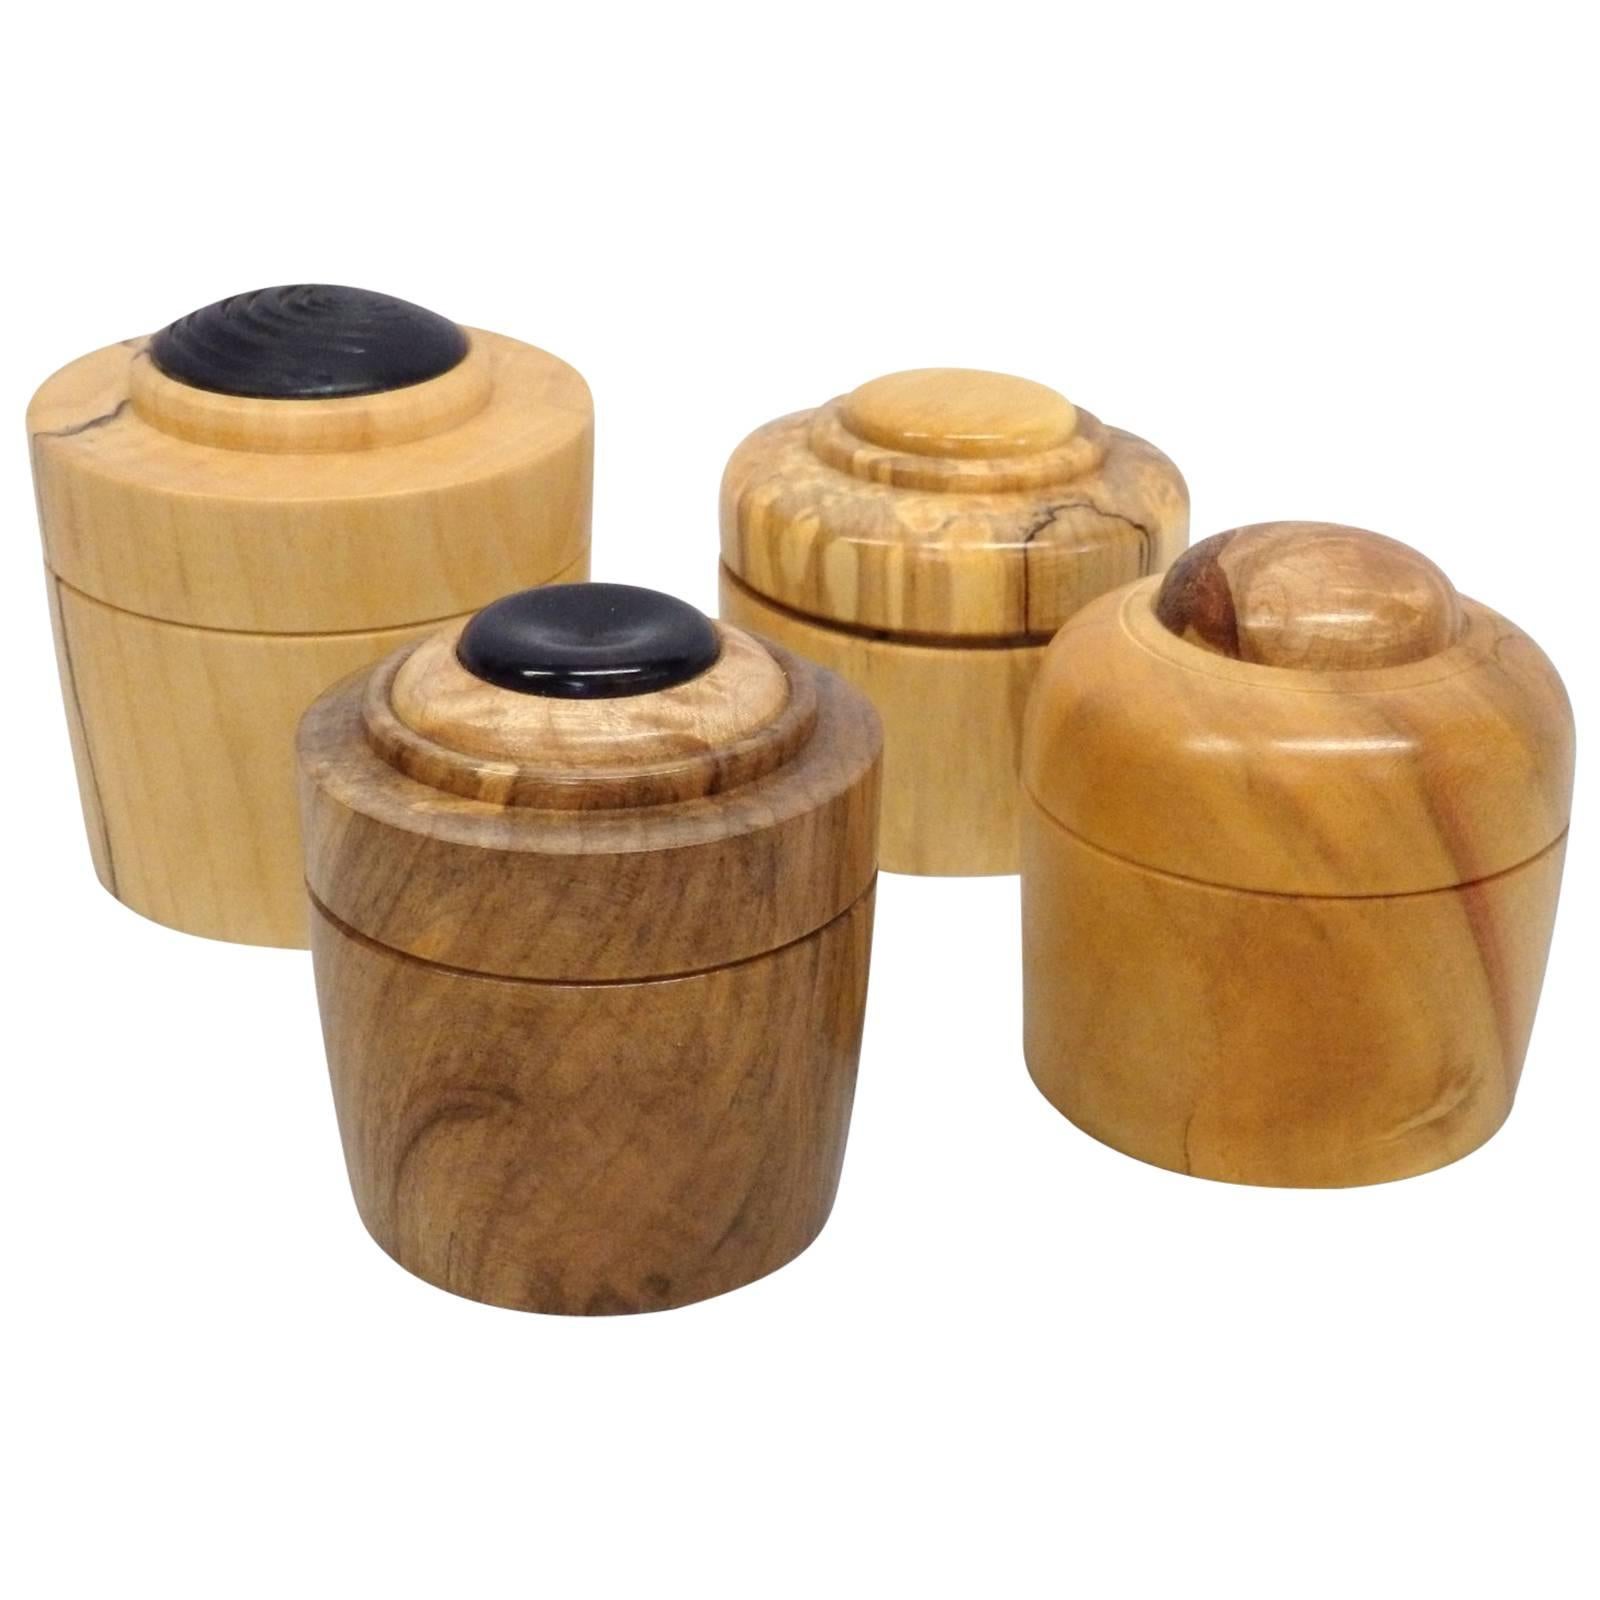 Four Studio Turned Wood Gift Canisters by Steve Sharpe